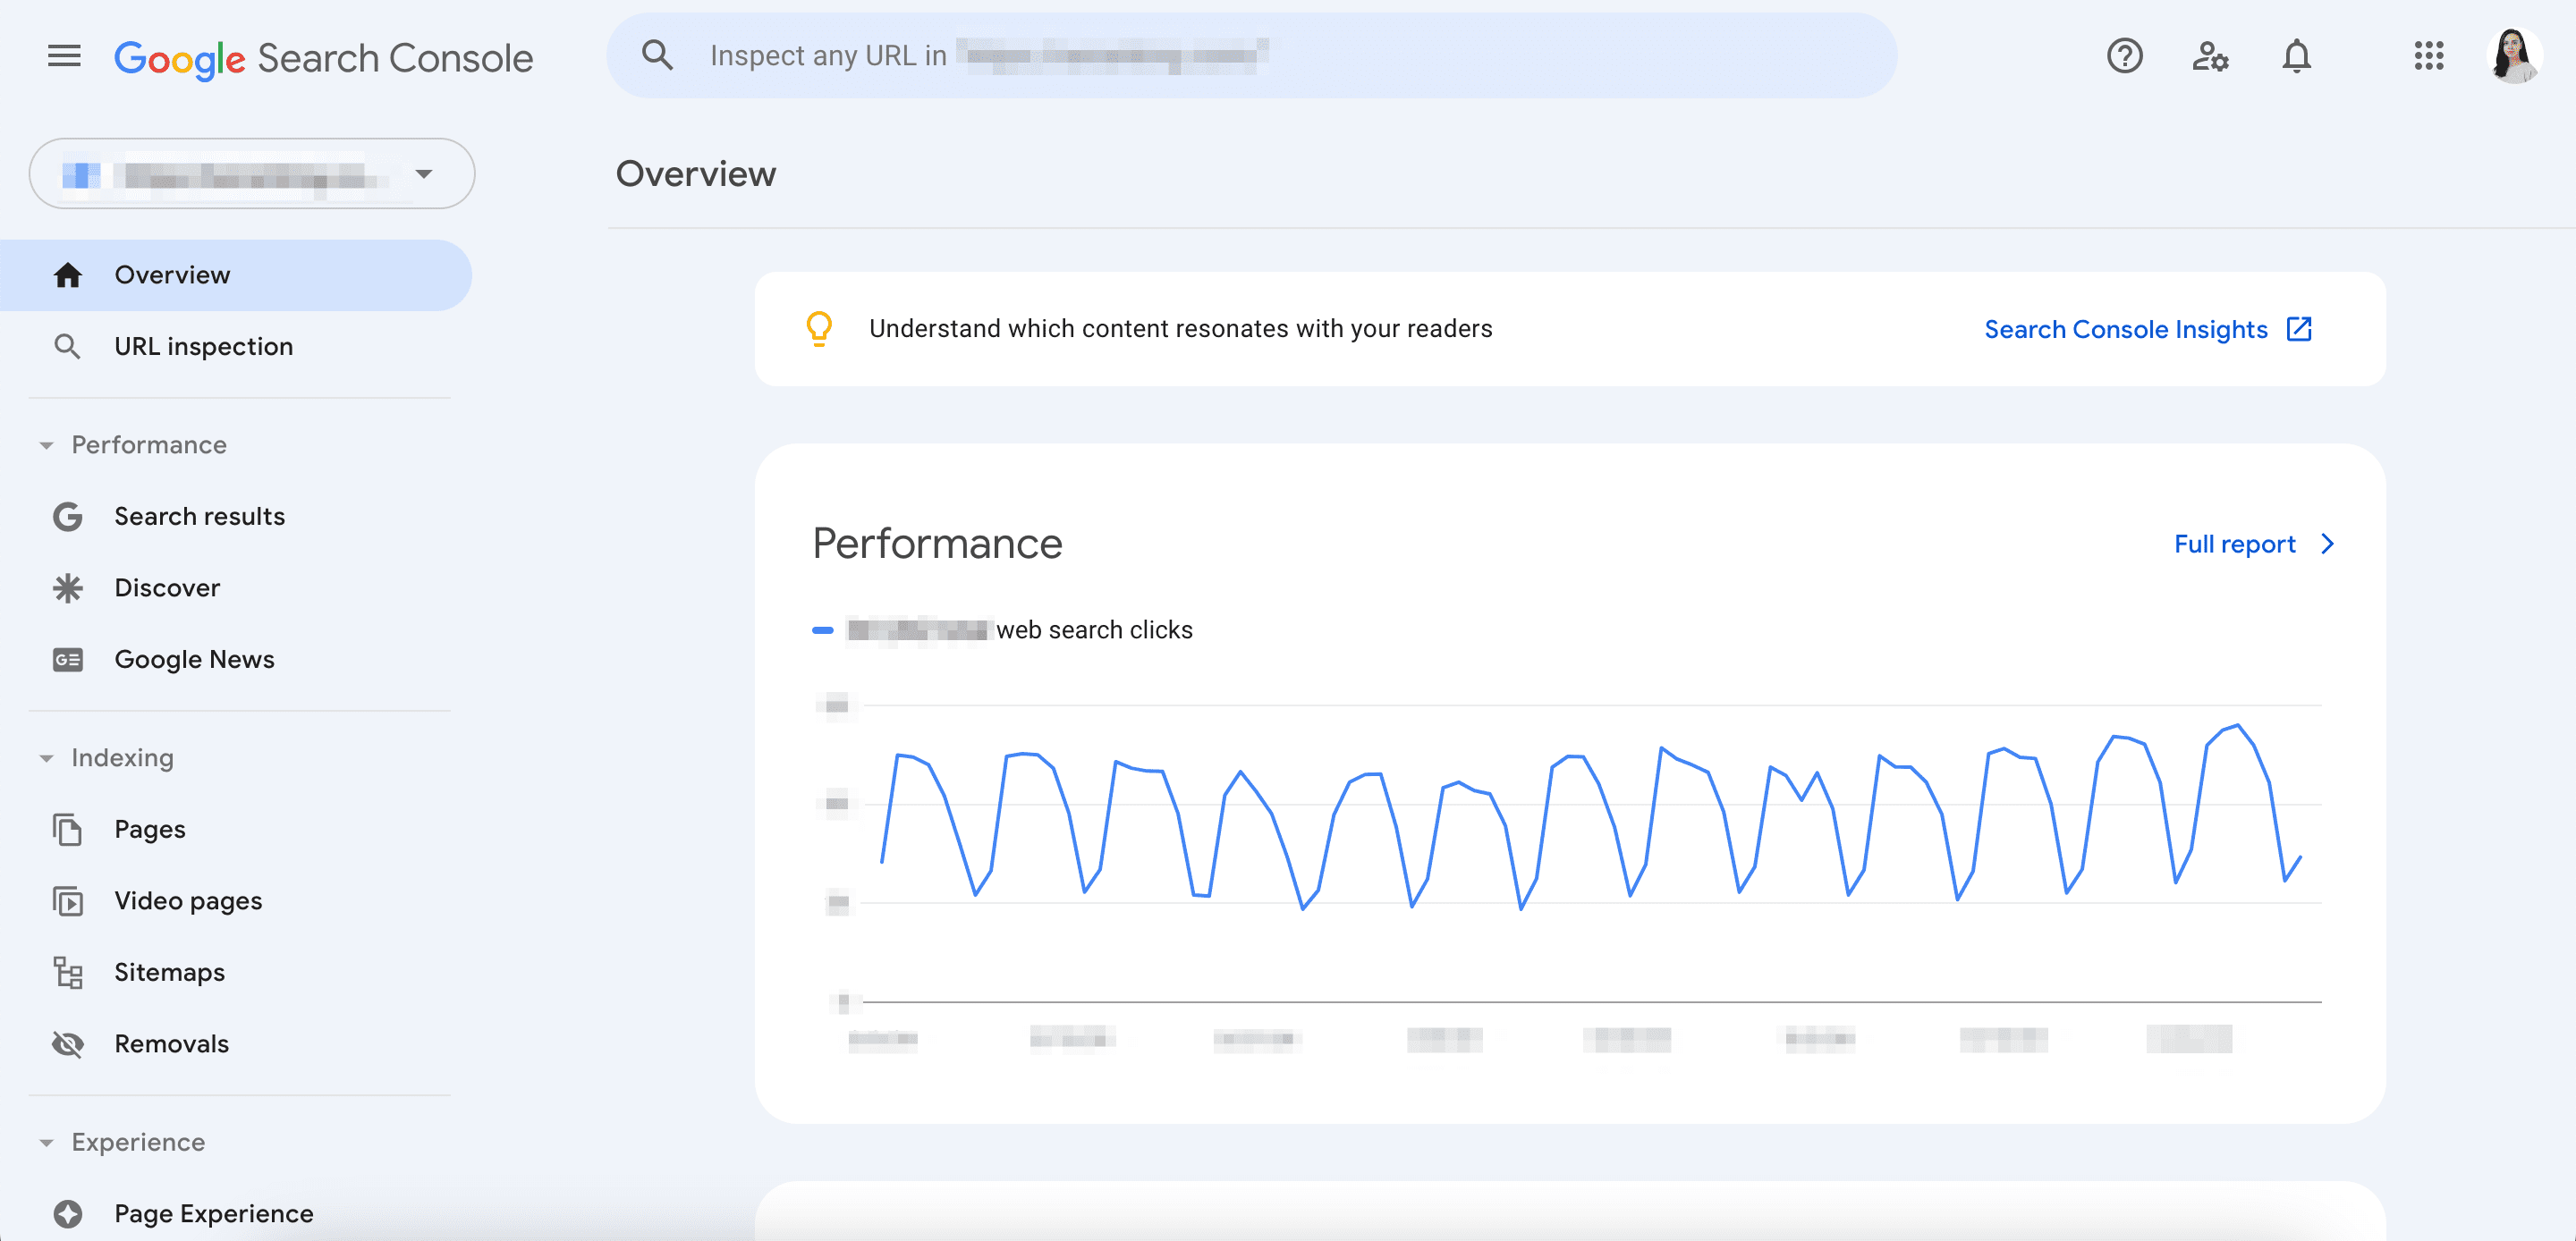 Google Search Console interface